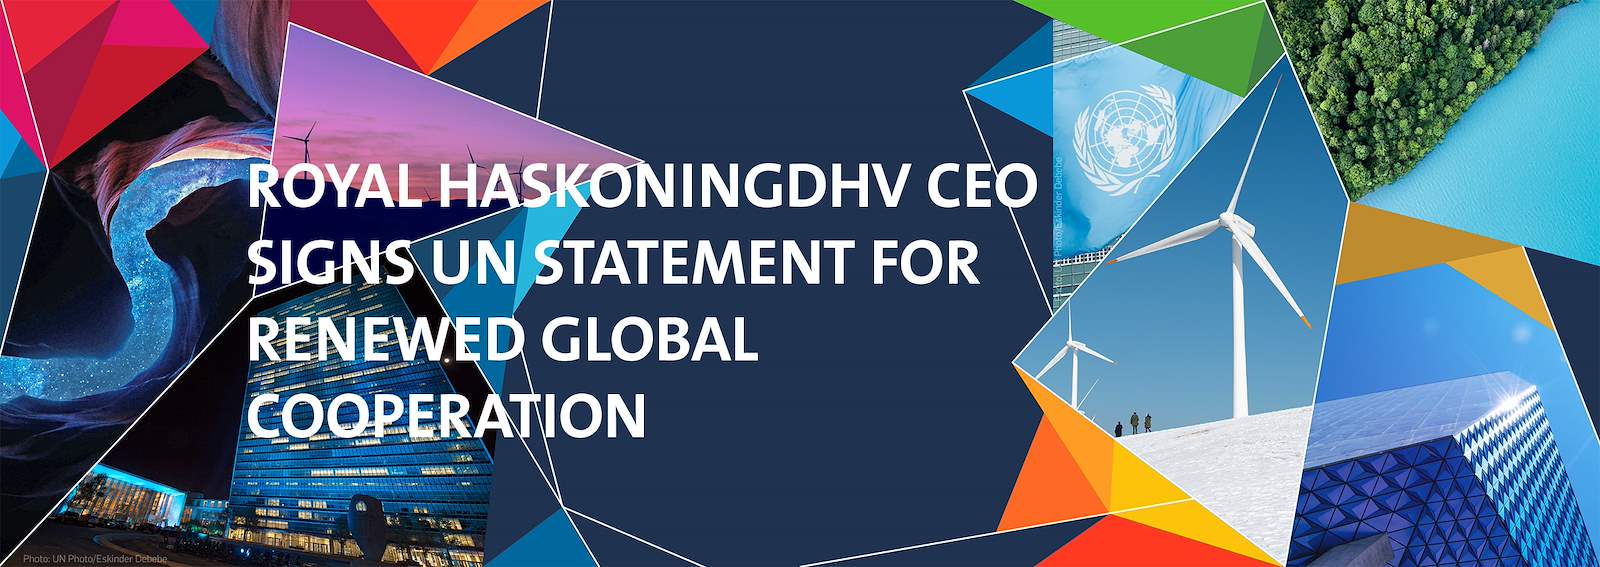 UNGC Uniting business live - CEO Statement for Renewed Global Cooperation